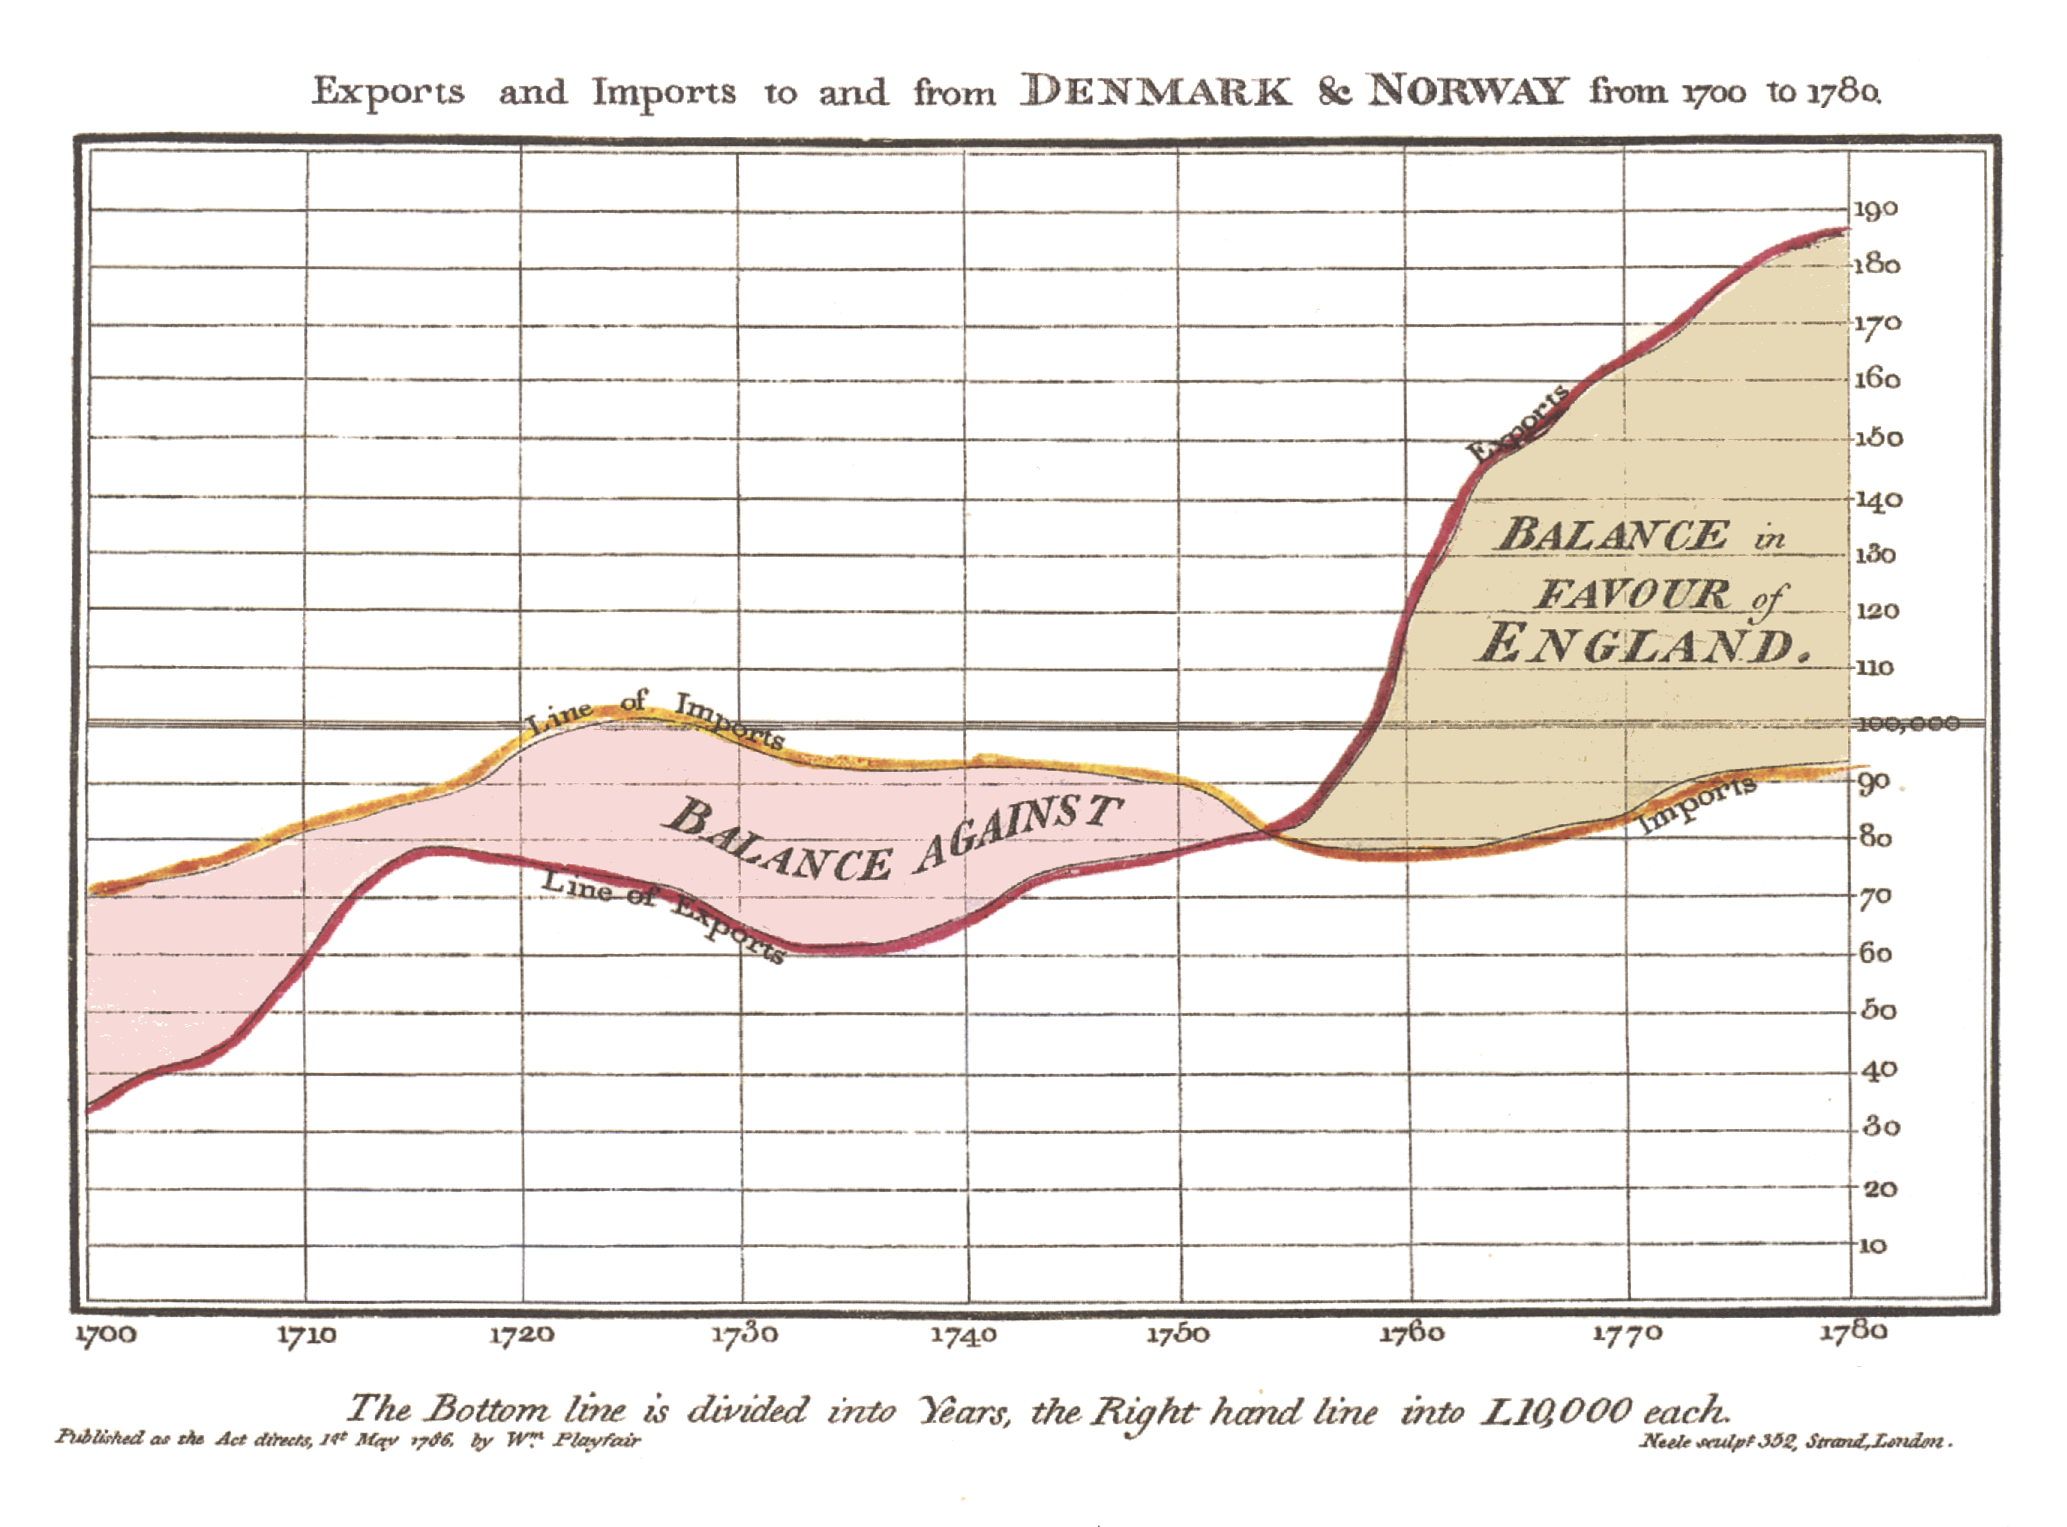 One of William Playfair's line charts in his Commercial and Political Atlas (1786) showing the trade balance of England.